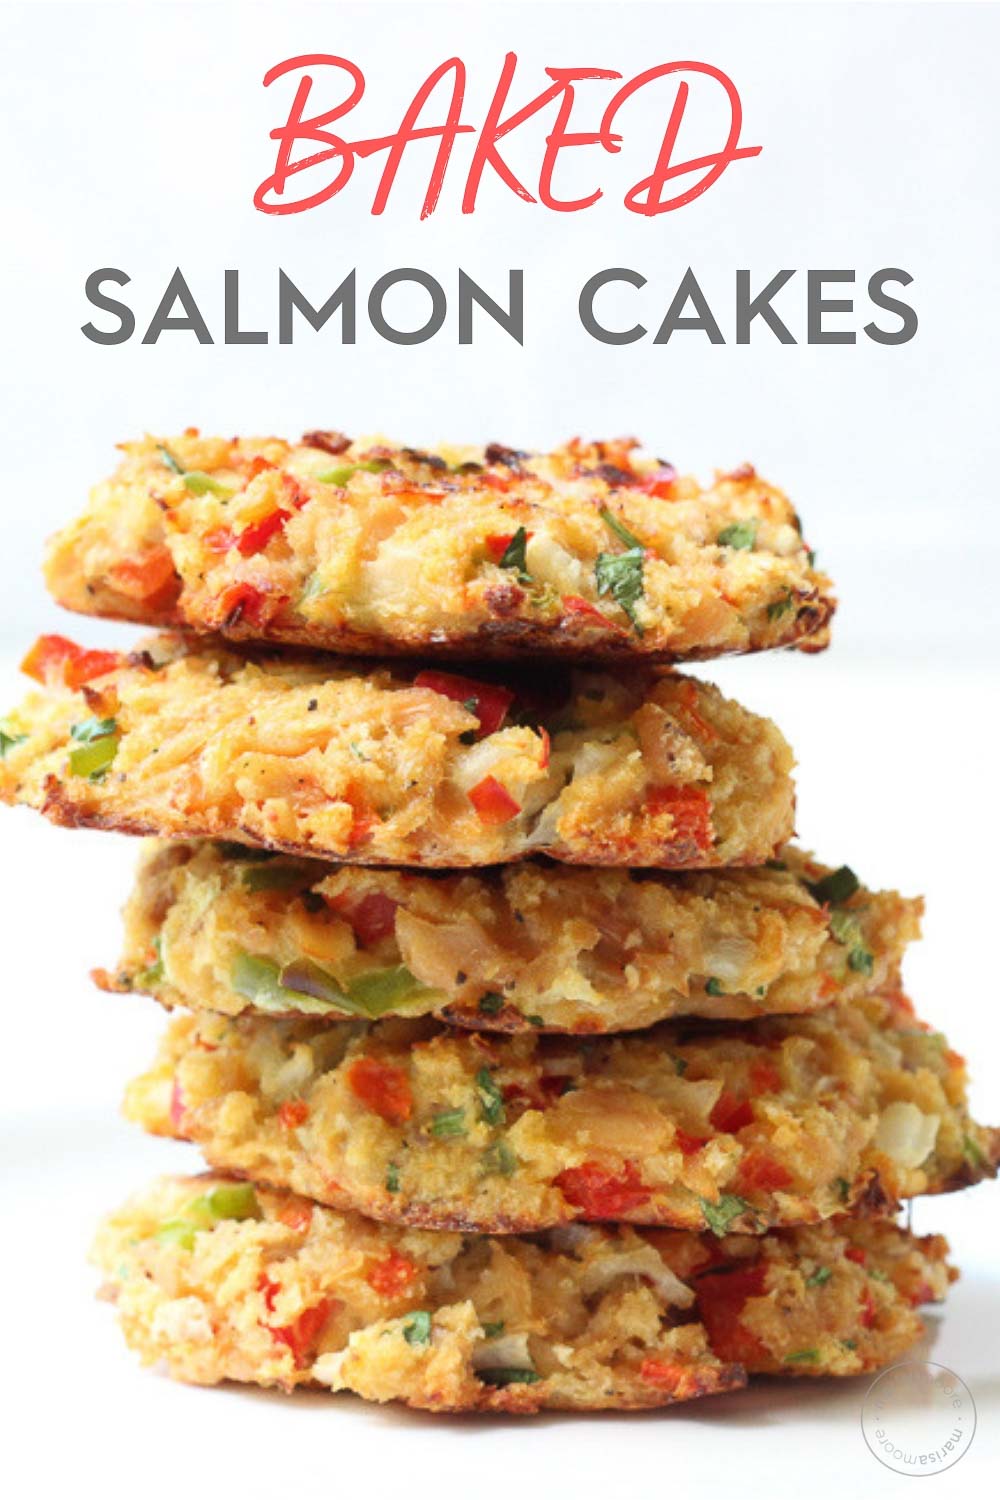 Baked Salmon Cakes - Marisa Moore Nutrition